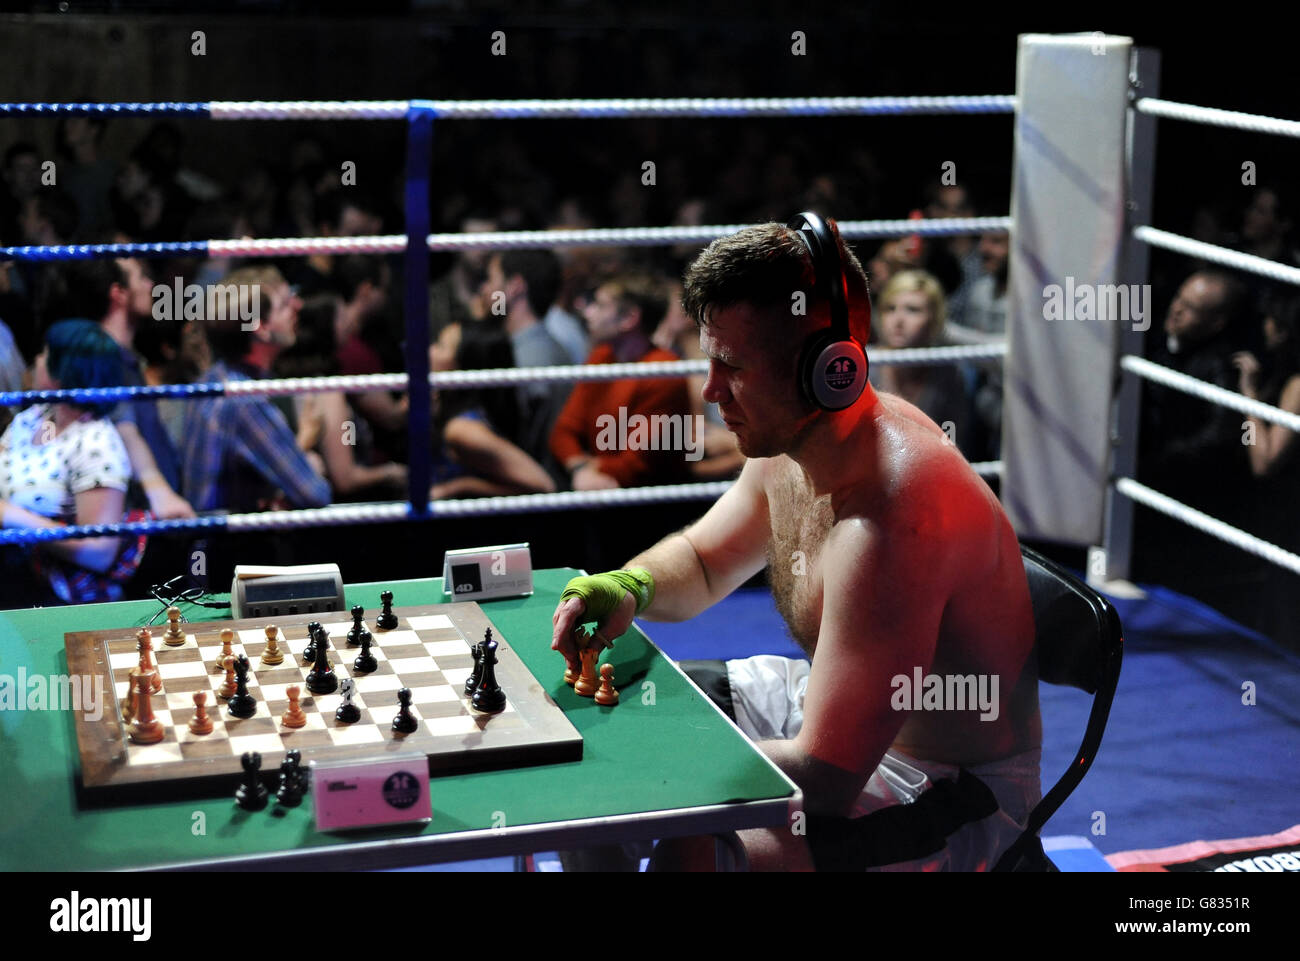 Sport - London Chessboxing Grandmaster Bash! - Scala. Karl Ouch (left) and  Ion Citu play a round of chess during their bout at Scala, London Stock  Photo - Alamy